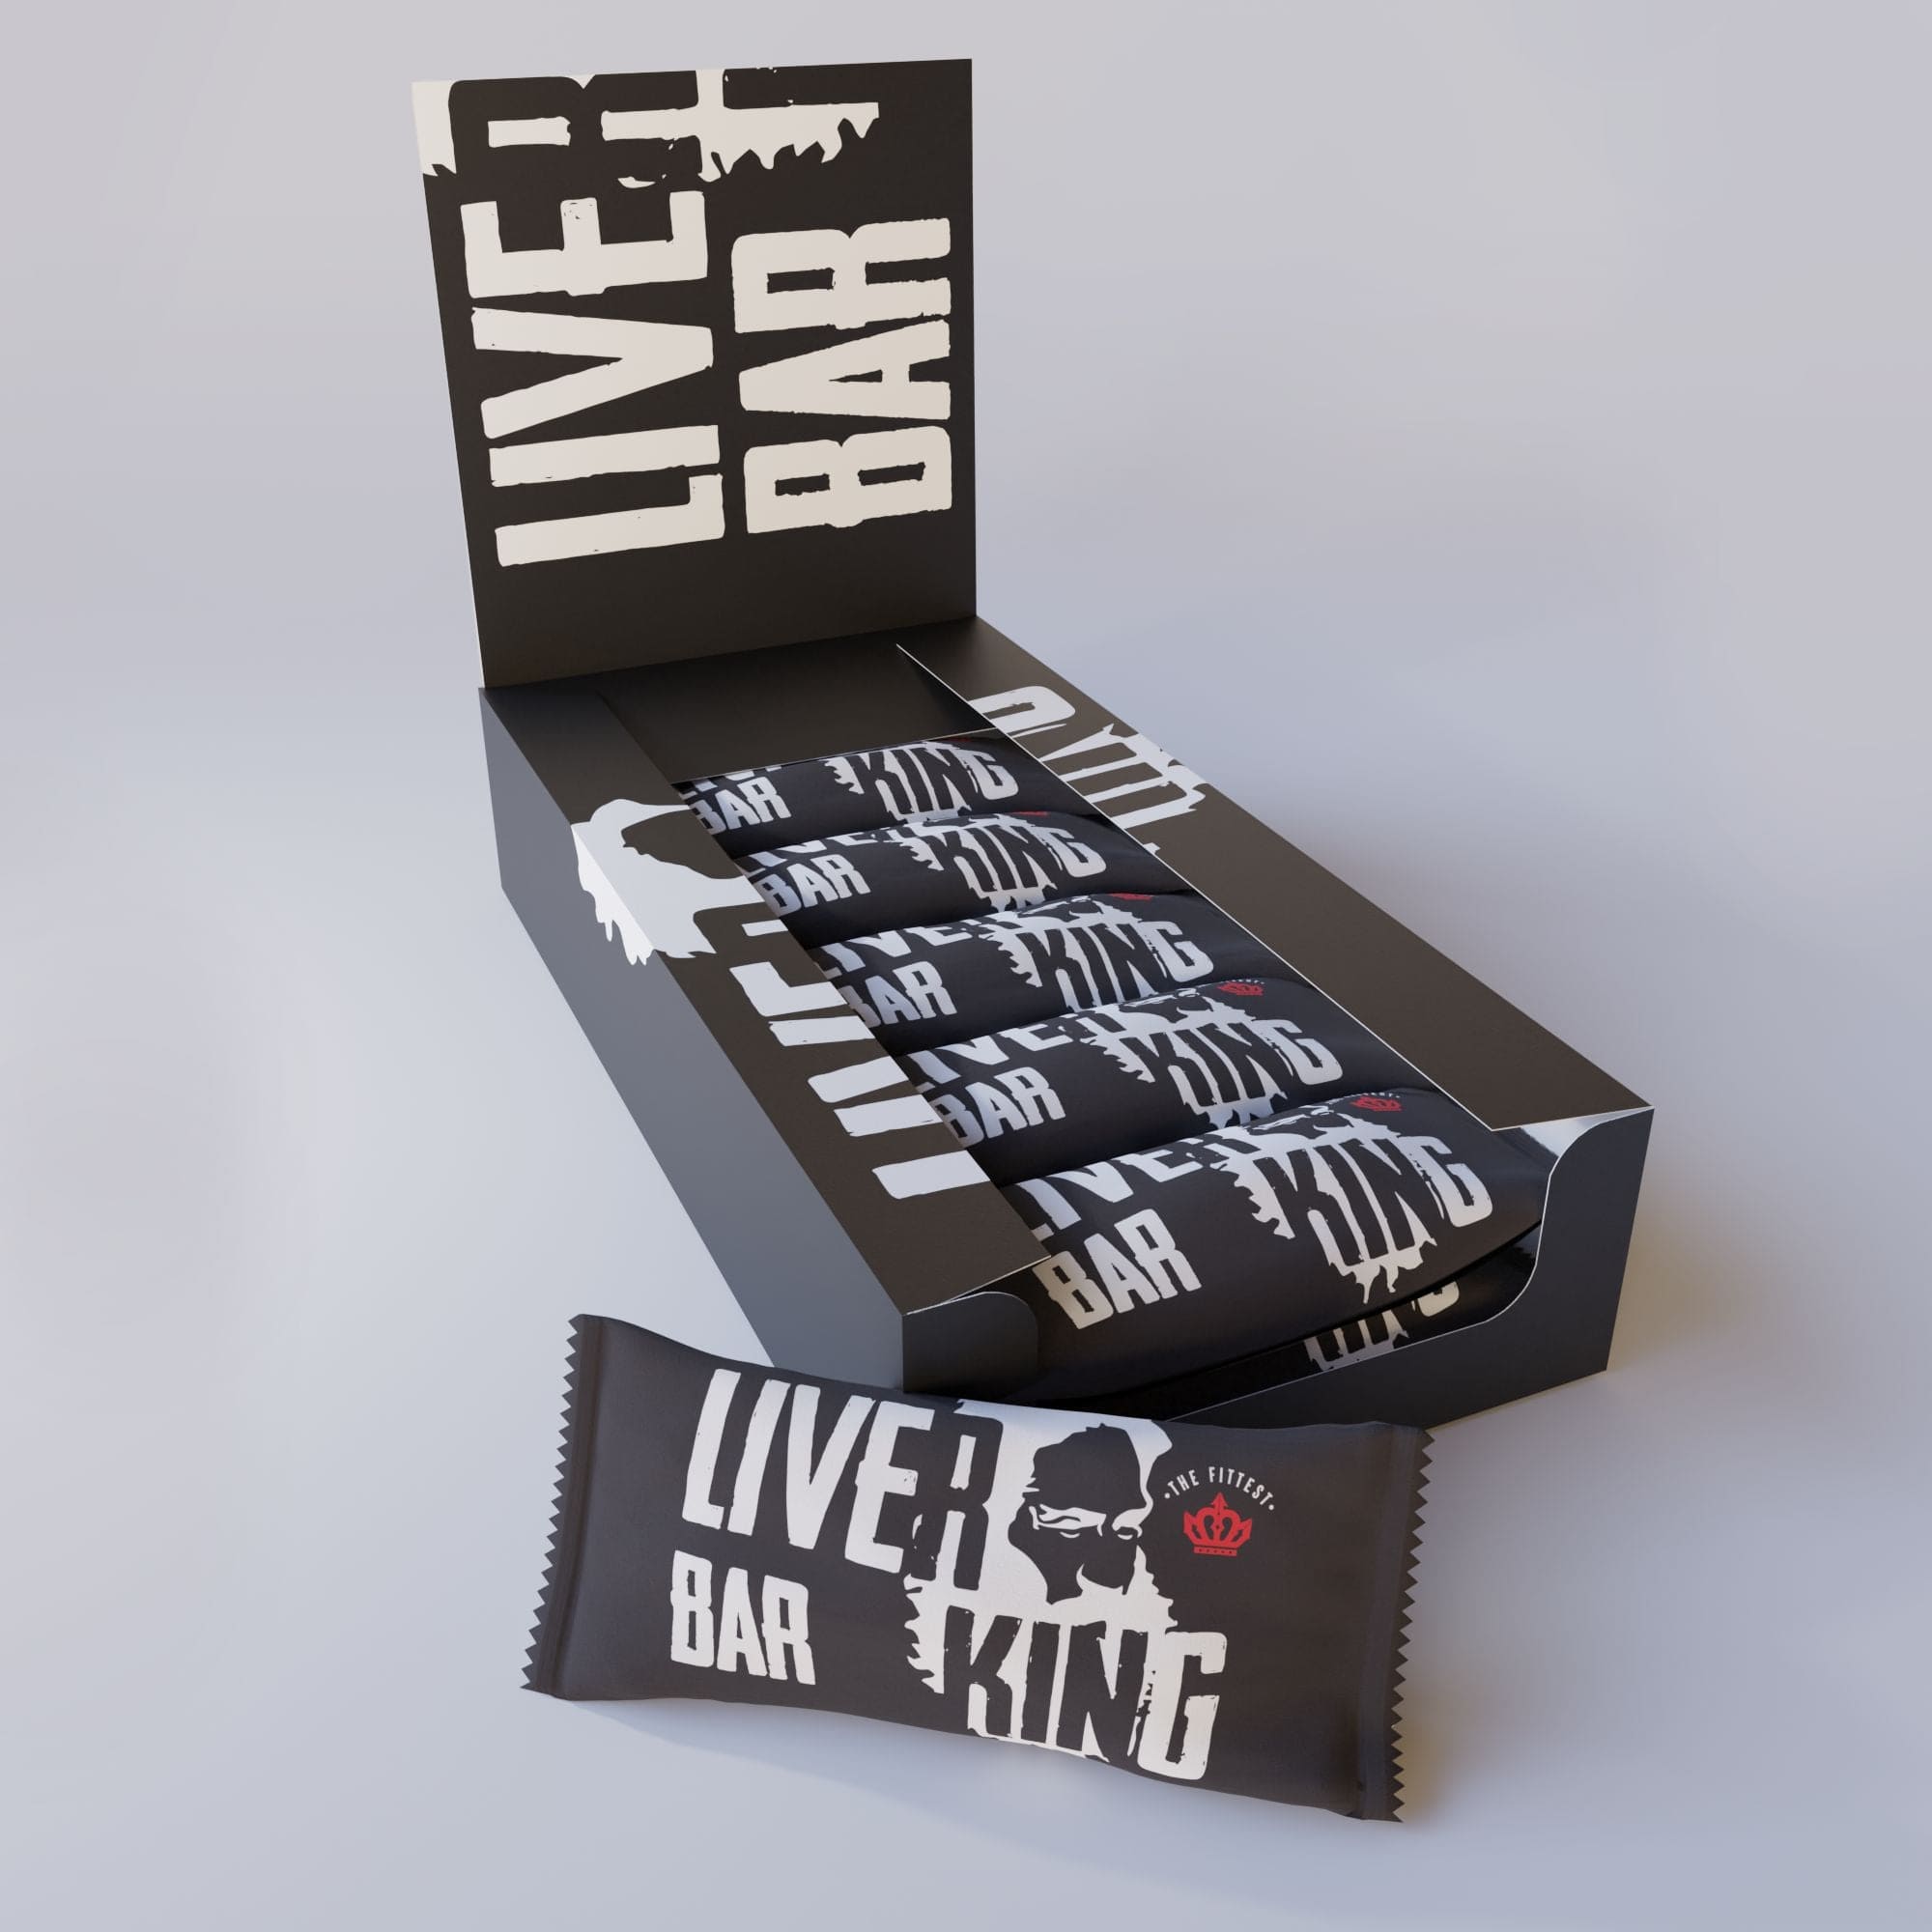 Liverking bar and box showing the full product with 12 bars to a box